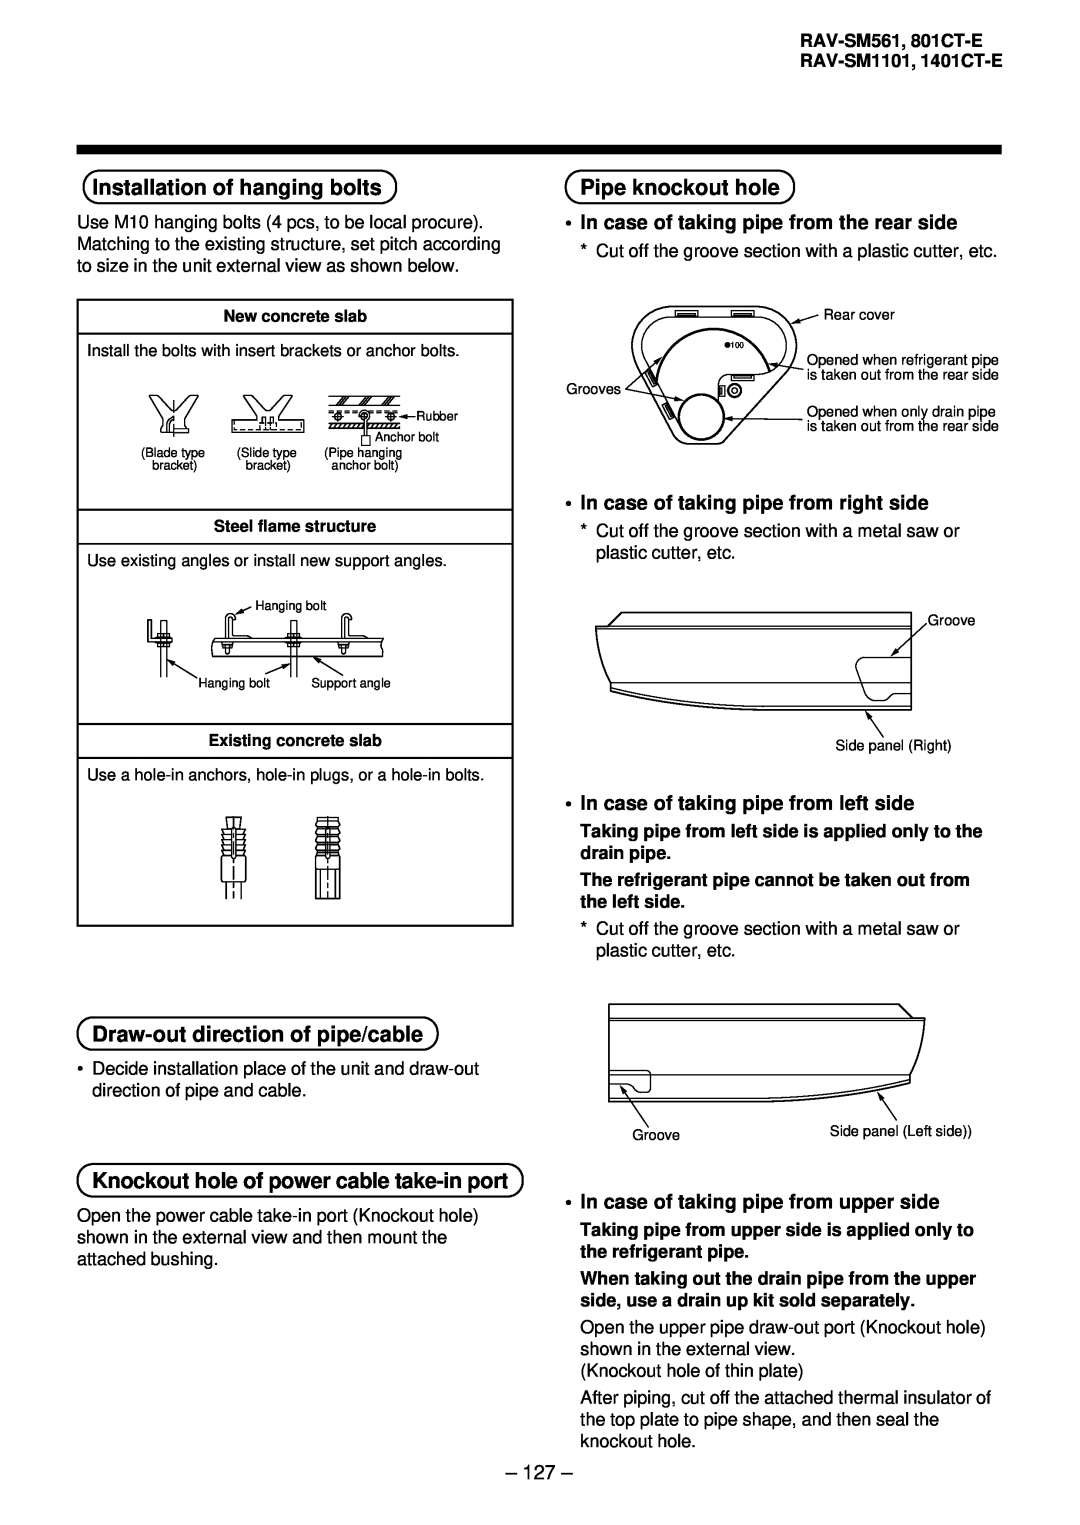 Balcar R410A service manual Installation of hanging bolts, Pipe knockout hole, Draw-outdirection of pipe/cable, 127 